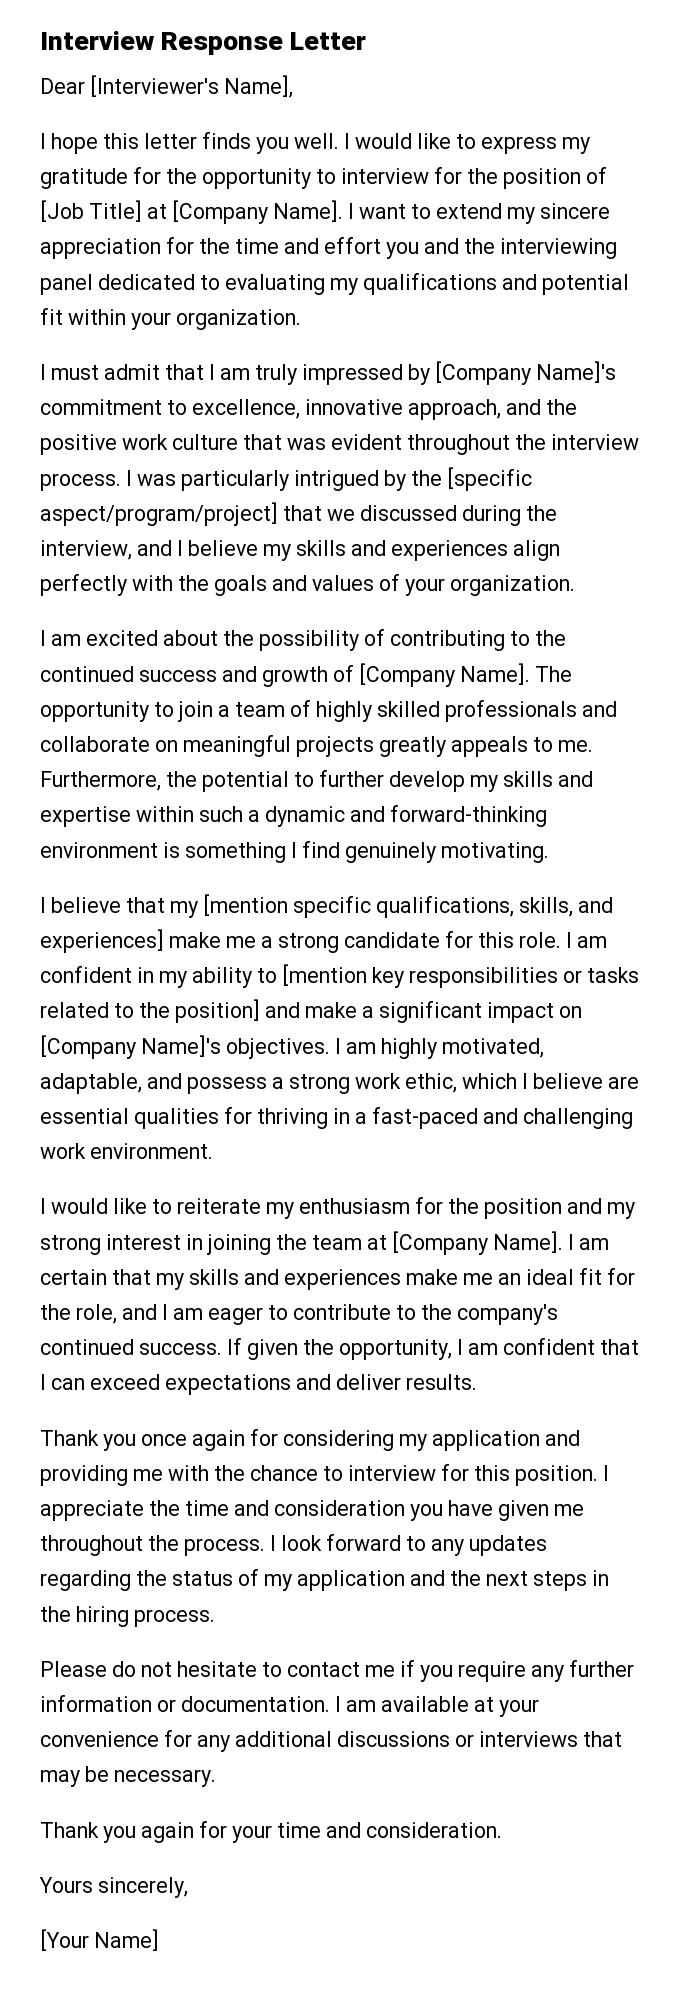 Interview Response Letter